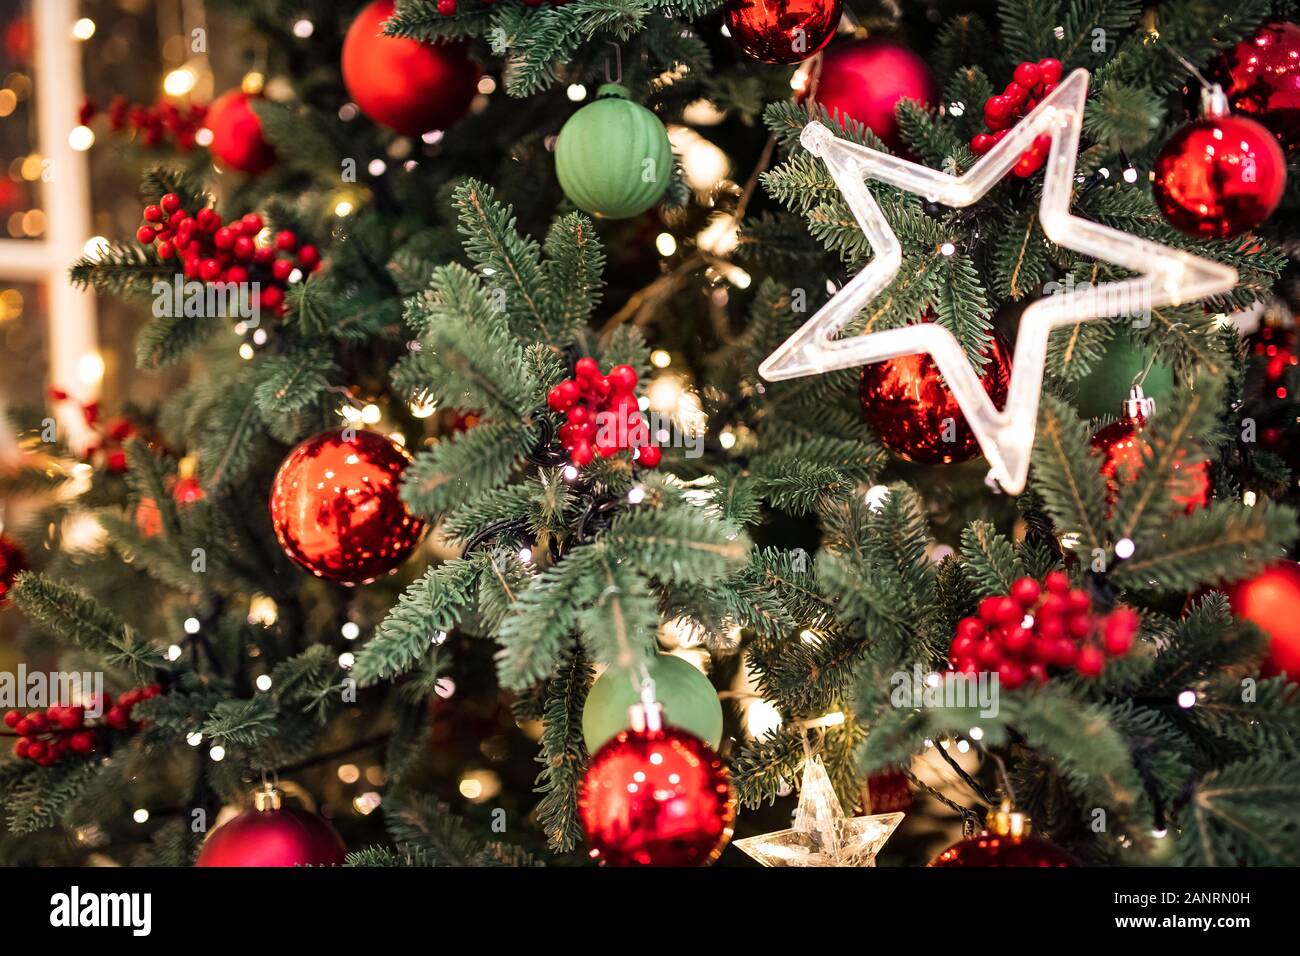 Christmas pine tree branch with decorations red balls gifts and star Stock Photo